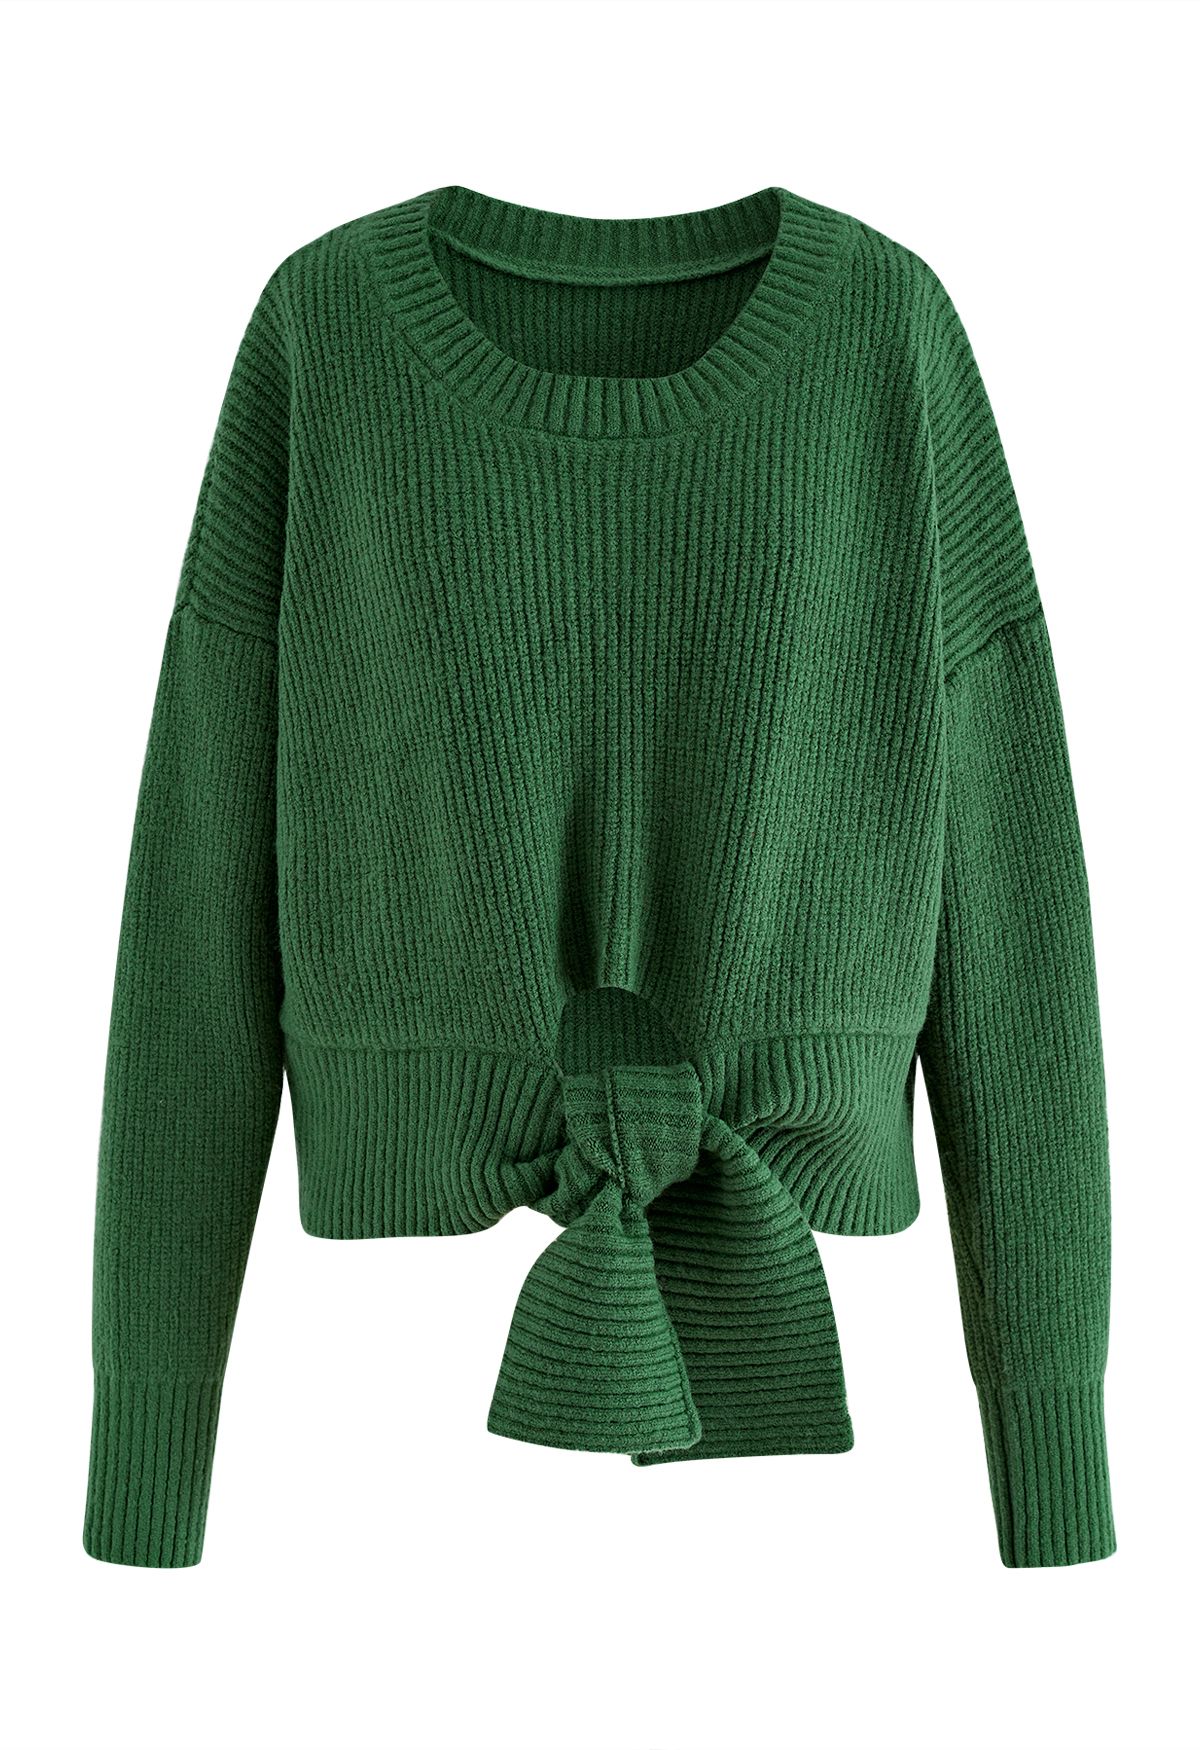 Self-Tie Knot Round Neck Knit Sweater in Green